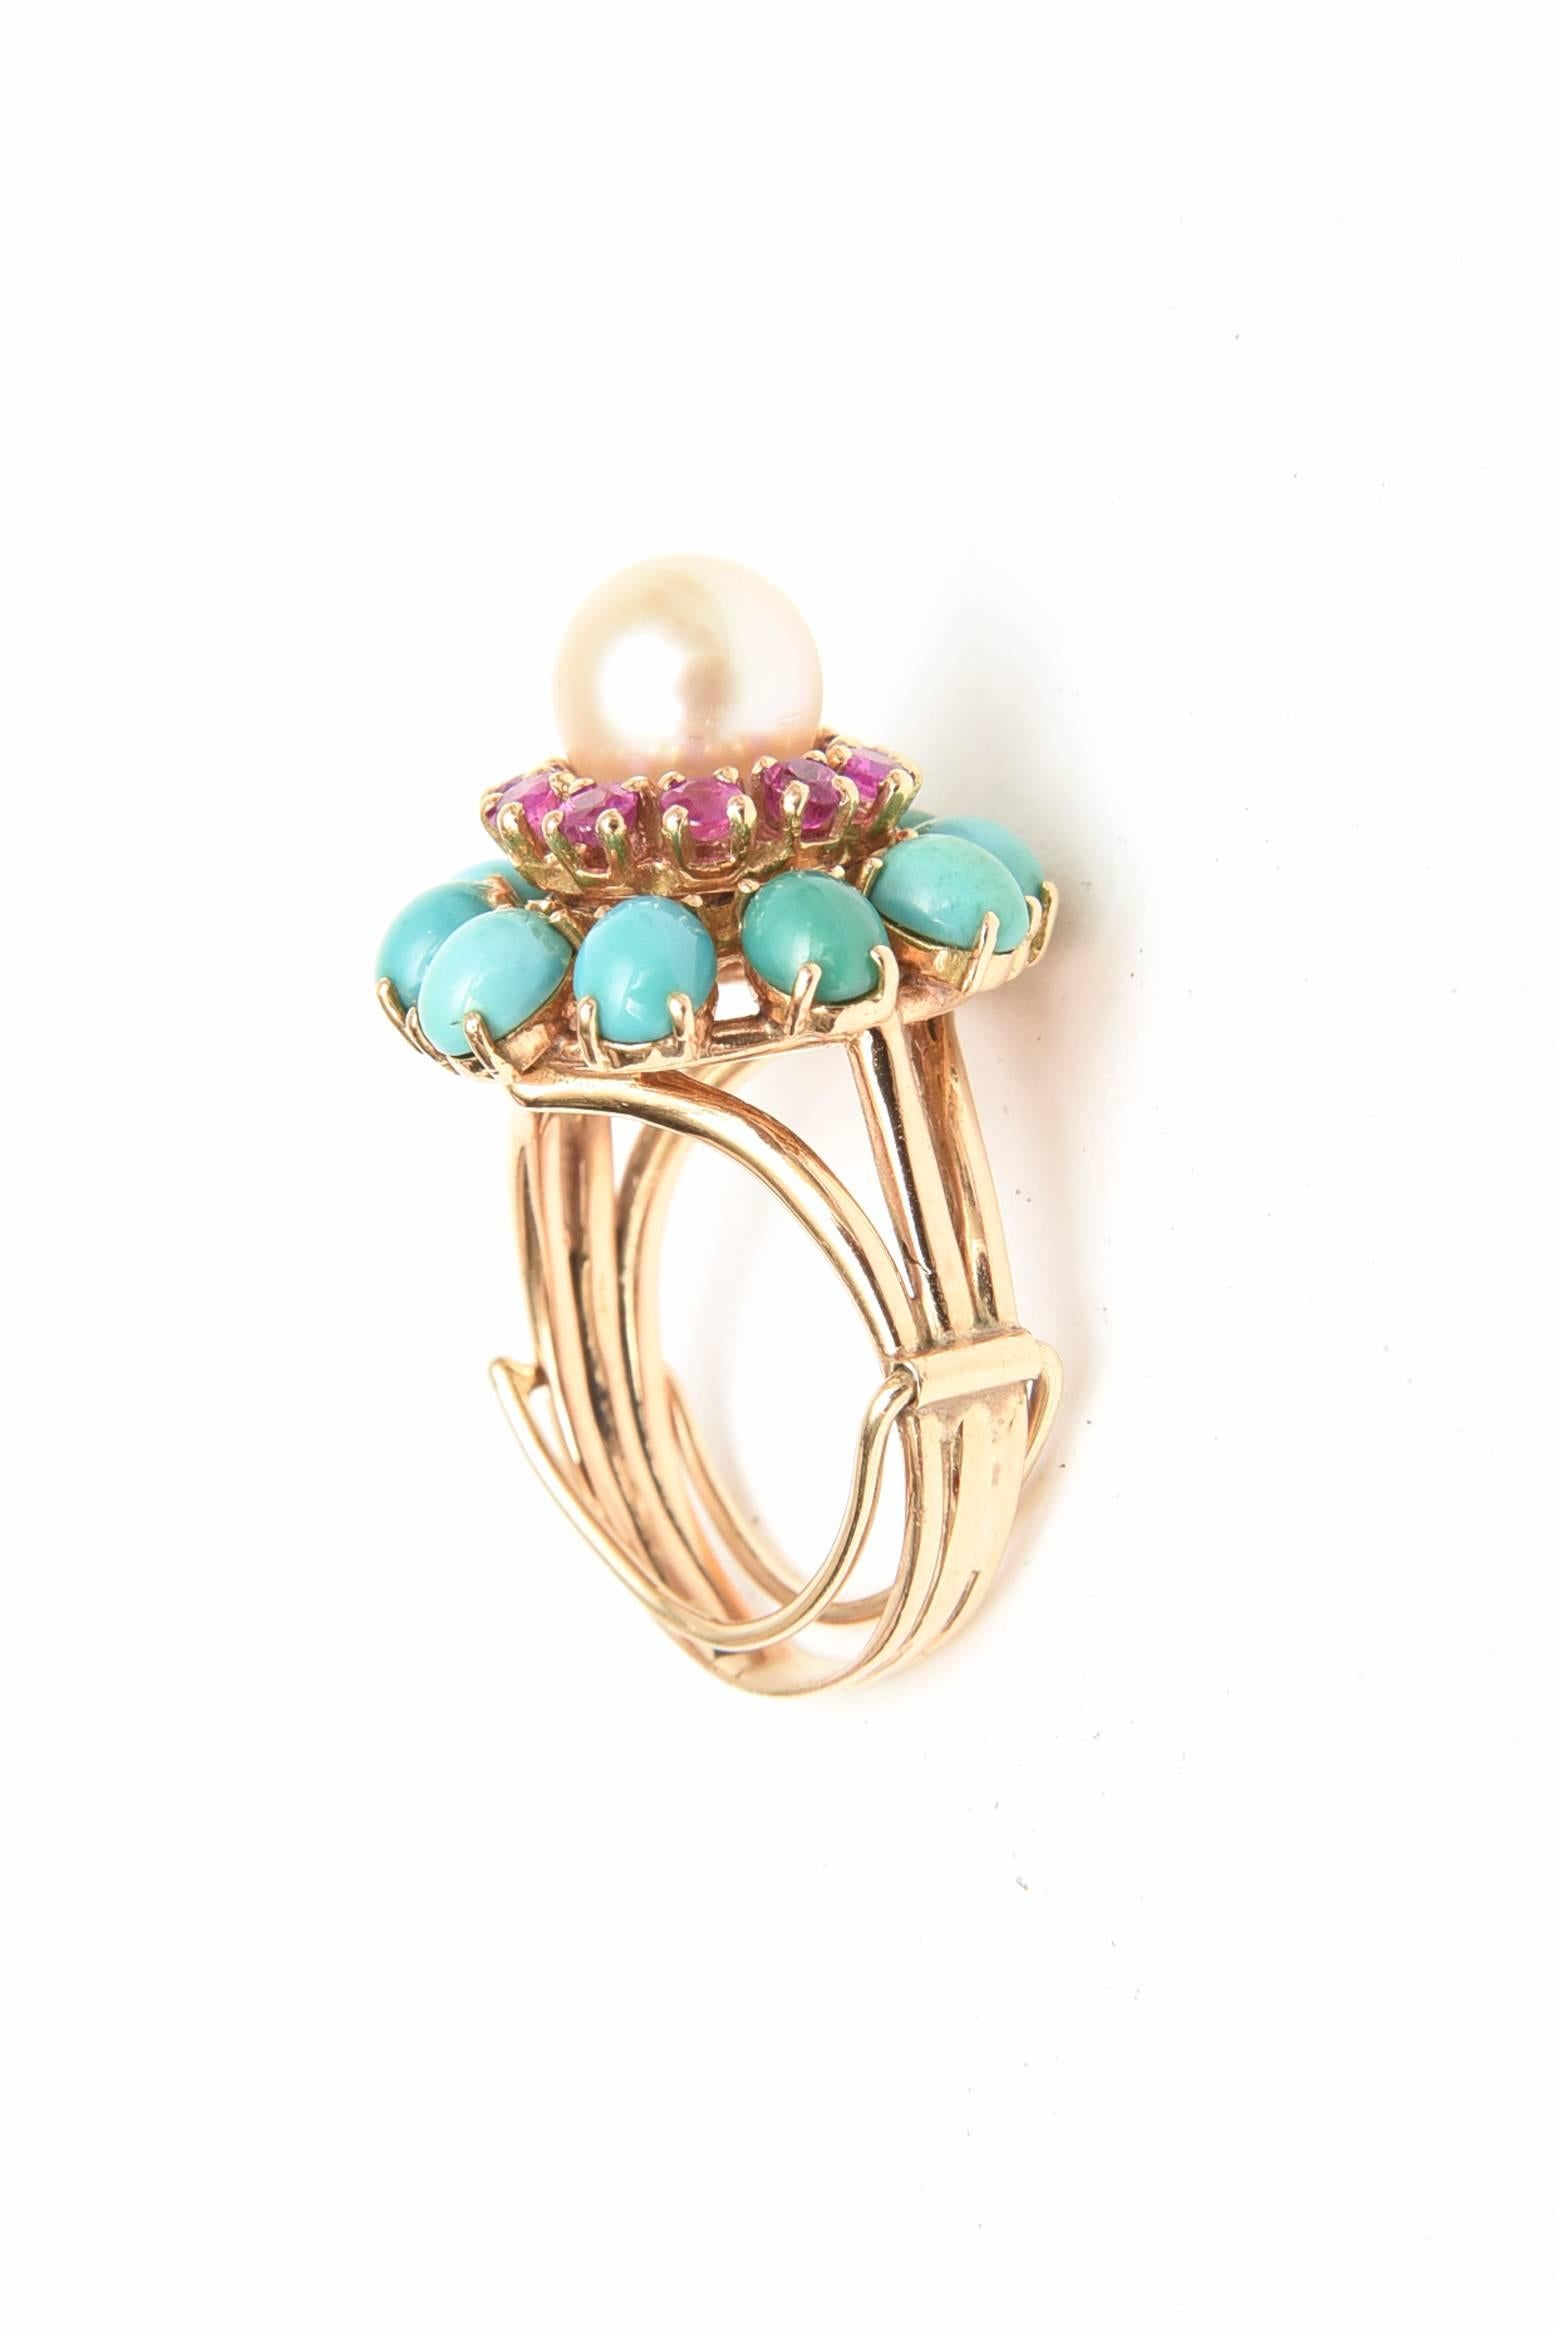 Women's Ruby, Pearl, Turquoise and 14 Karat Yellow Gold Dome Cocktail Ring Vintage